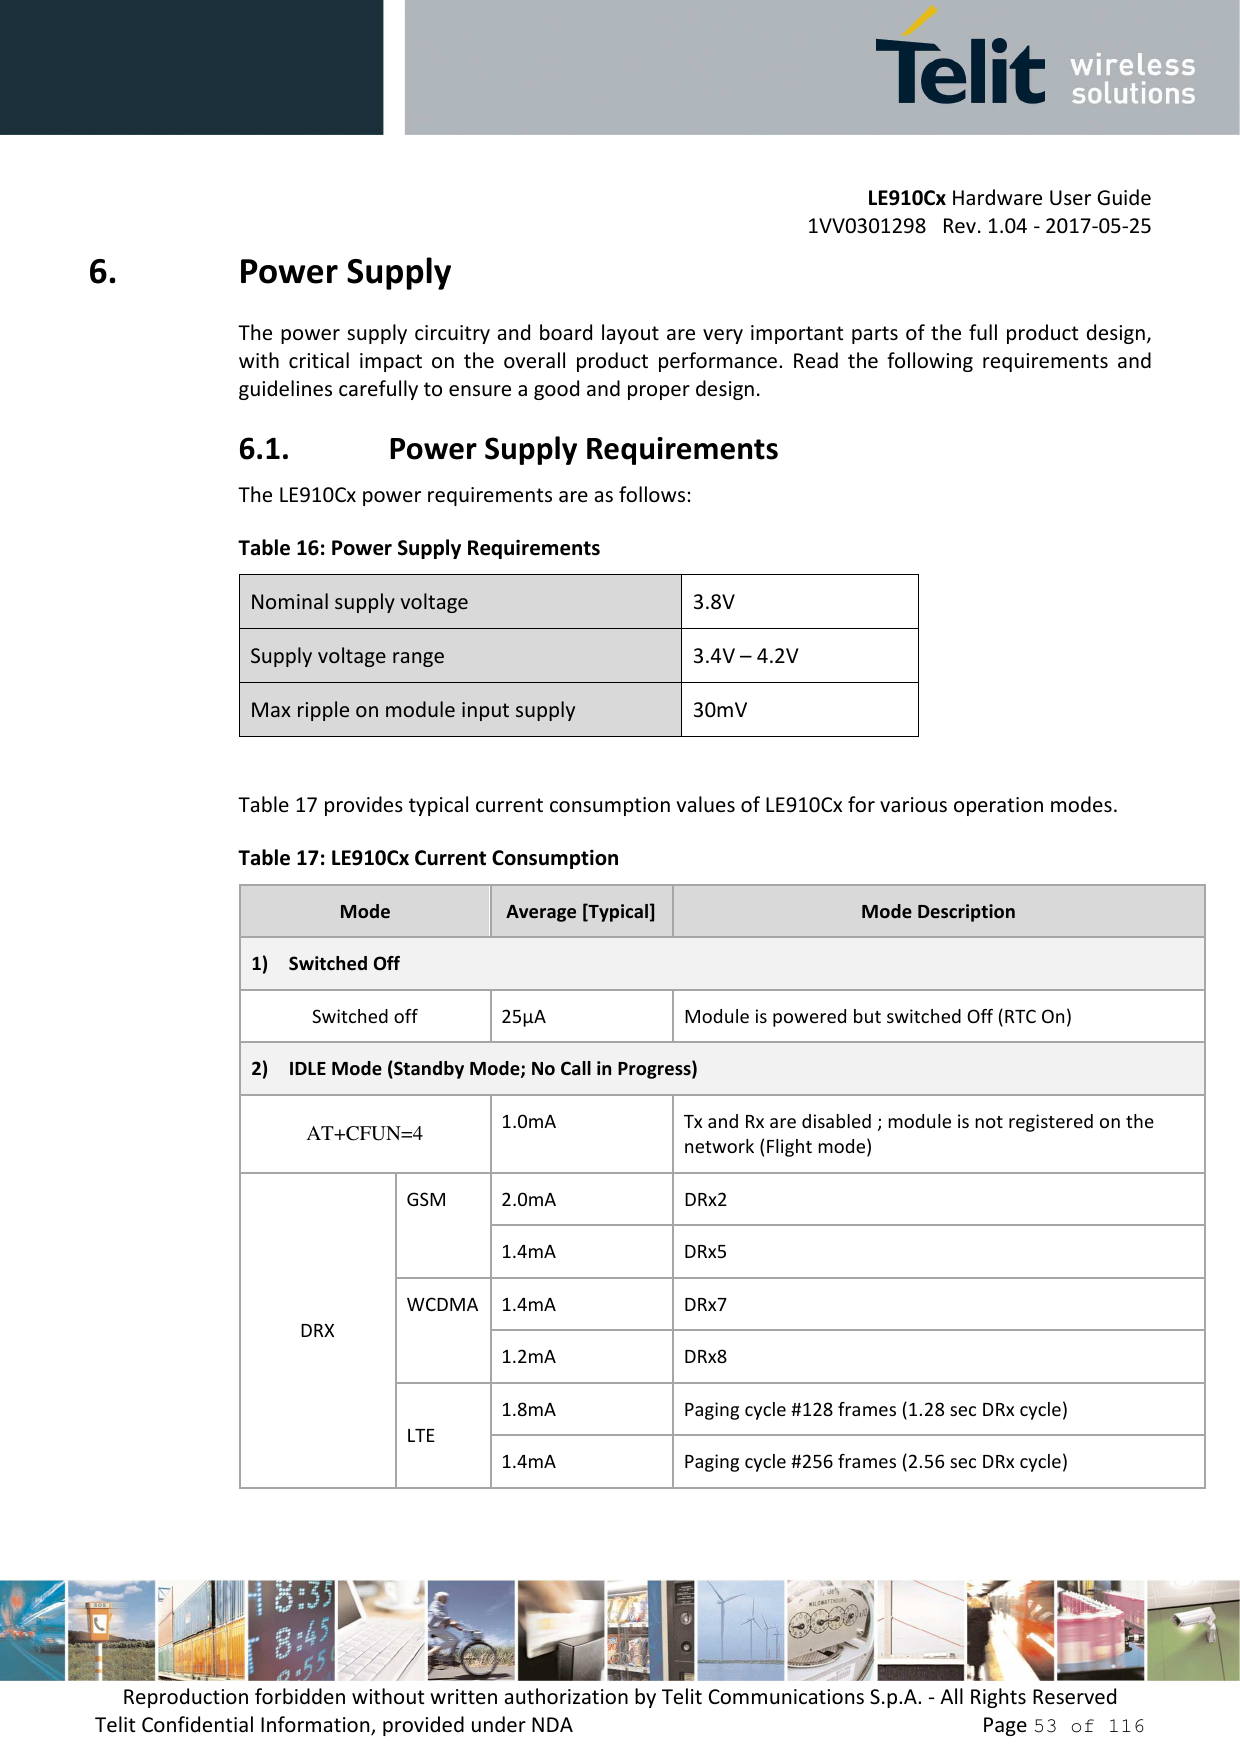         LE910Cx Hardware User Guide 1VV0301298   Rev. 1.04 - 2017-05-25 Reproduction forbidden without written authorization by Telit Communications S.p.A. - All Rights Reserved Telit Confidential Information, provided under NDA                 Page 53 of 116 6. Power Supply The power supply circuitry and board layout are very important parts of the full product design, with  critical  impact  on  the  overall  product  performance.  Read  the  following  requirements  and guidelines carefully to ensure a good and proper design. 6.1. Power Supply Requirements The LE910Cx power requirements are as follows: Table 16: Power Supply Requirements Nominal supply voltage  3.8V Supply voltage range  3.4V – 4.2V Max ripple on module input supply  30mV  Table 17 provides typical current consumption values of LE910Cx for various operation modes. Table 17: LE910Cx Current Consumption Mode  Average [Typical]  Mode Description 1) Switched Off Switched off  25µA  Module is powered but switched Off (RTC On) 2) IDLE Mode (Standby Mode; No Call in Progress) AT+CFUN=4  1.0mA Tx and Rx are disabled ; module is not registered on the network (Flight mode)  DRX GSM  2.0mA  DRx2 1.4mA  DRx5 WCDMA  1.4mA  DRx7 1.2mA  DRx8 LTE 1.8mA  Paging cycle #128 frames (1.28 sec DRx cycle) 1.4mA  Paging cycle #256 frames (2.56 sec DRx cycle) 